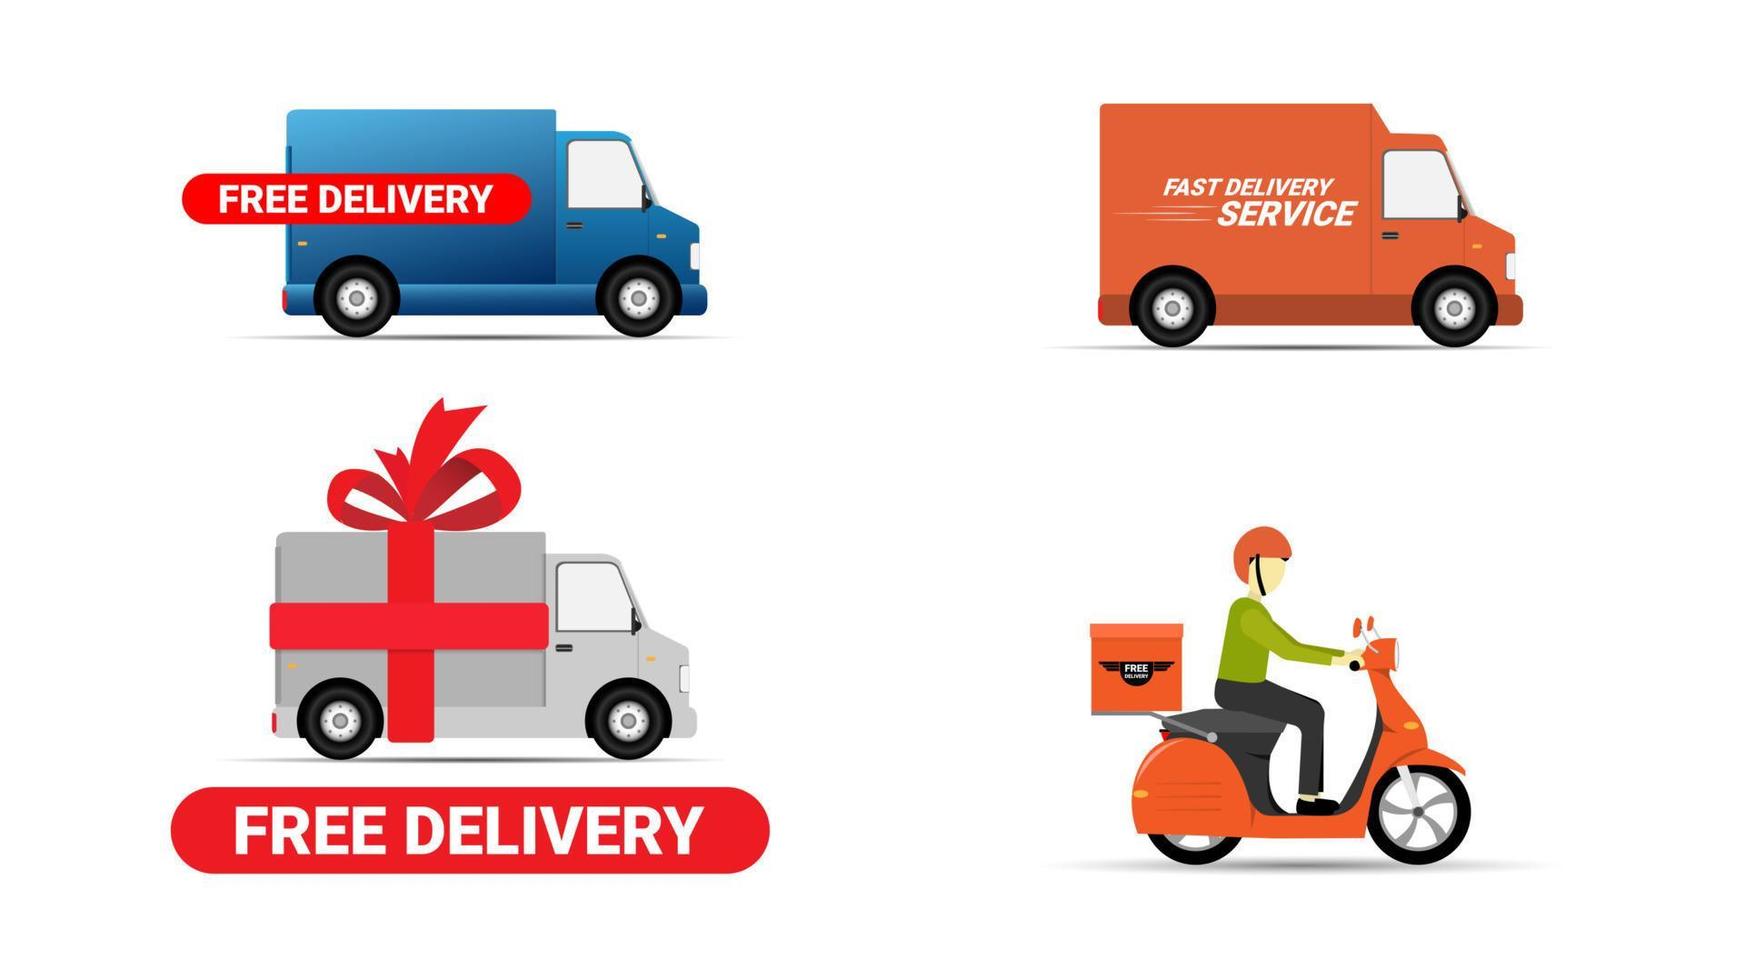 Set of Delivery van and scooter vector illustration. fast and free delivery service vehicle, city car cargo, logistic delivery 24 hours.